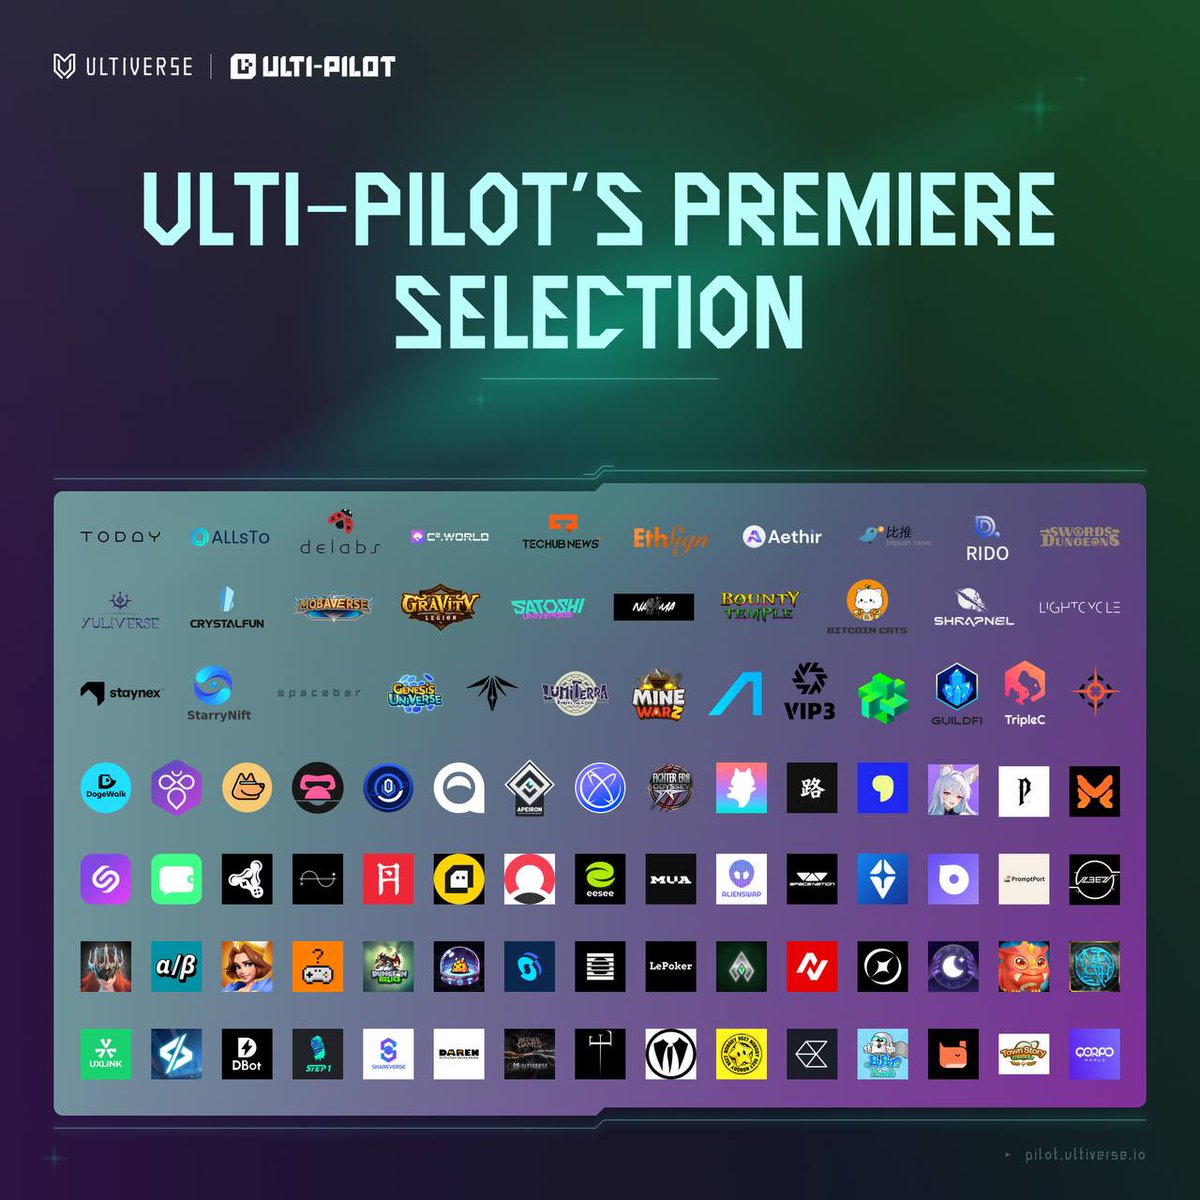 You may have already caught wind of the excitement - Ulti-Pilot has integrated over 300 gaming/AI projects spanning both Web2 and Web3. Now, let's delve deeper into what sets us apart. 👇